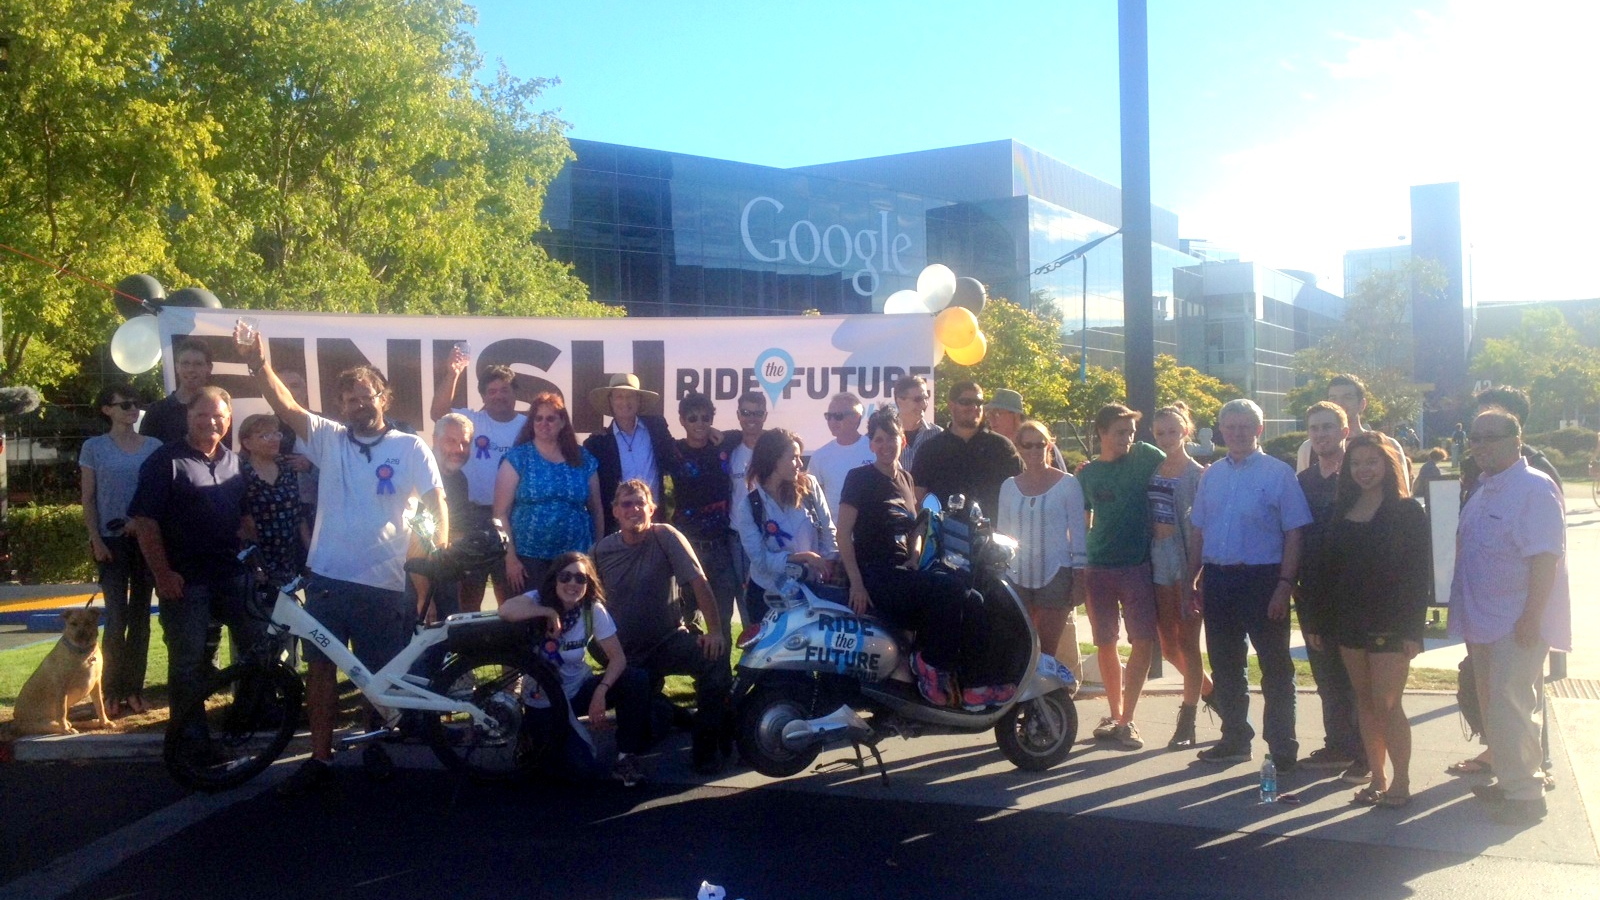 Ride The Future electric vehicle tour ends at Google HQ (Photos: Morgan Vanderwall)